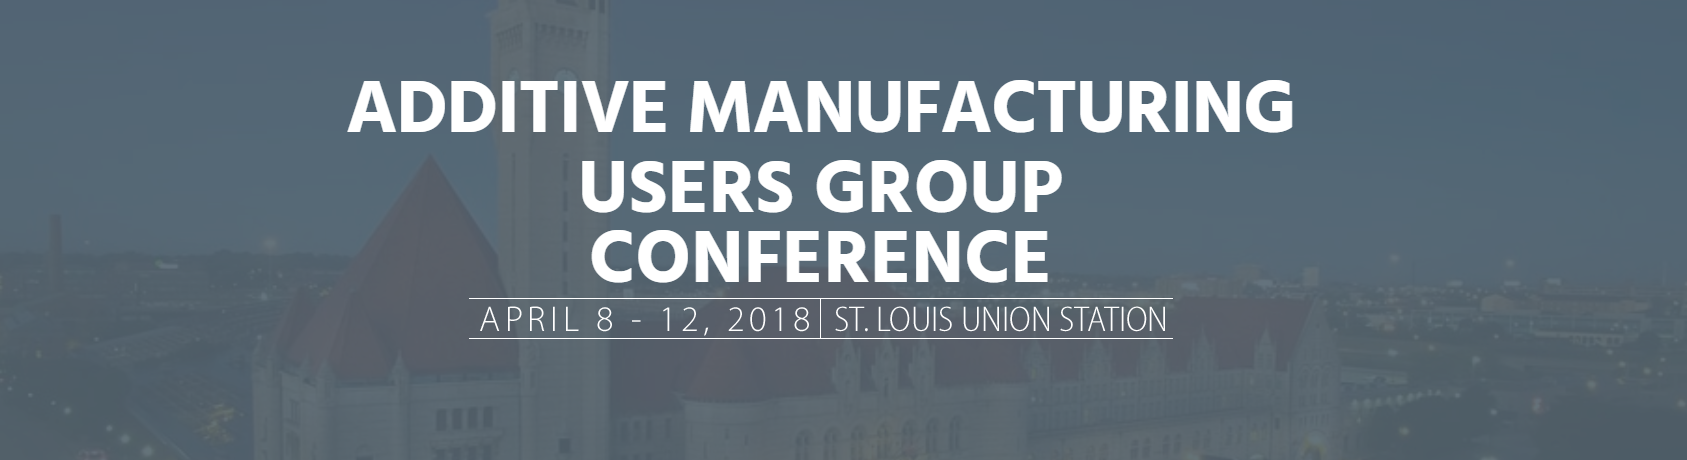 Additive Manufacturing Users Group Conference